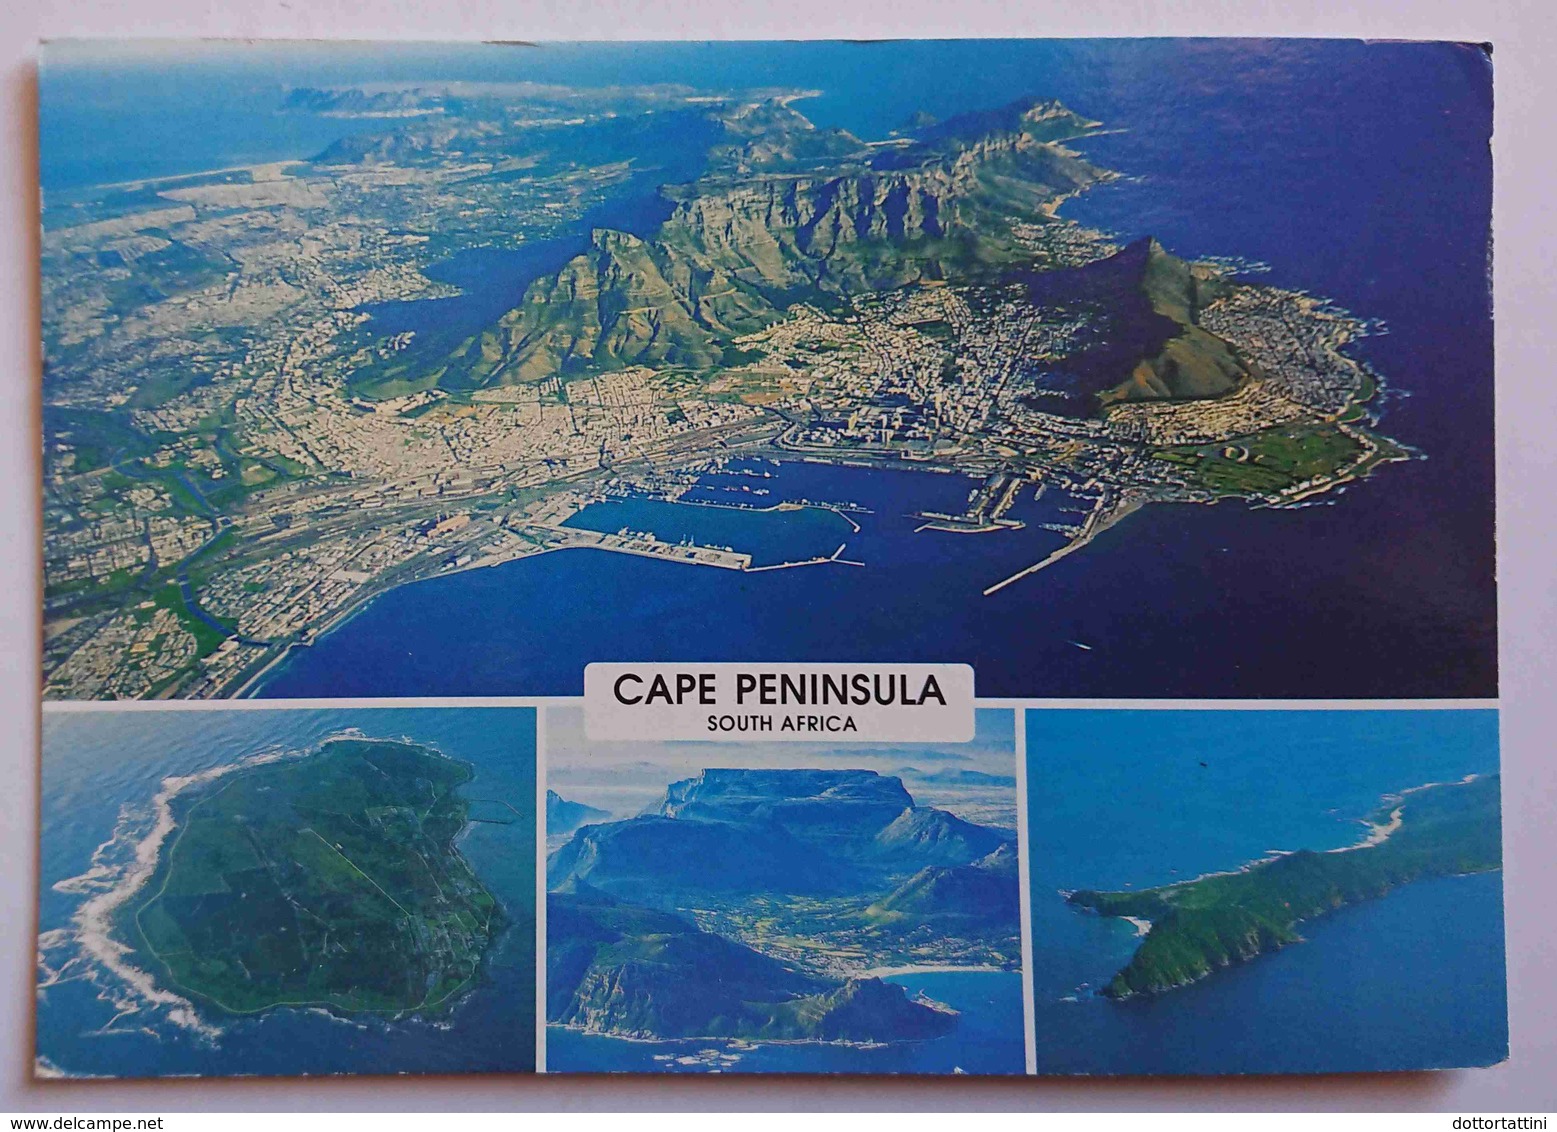 AERIAL VIEW OF CAPE PENINSULA - Robben Island In Table Bay, Hout Bay Valley, Cape Point - South Africa -  Vg - Sud Africa